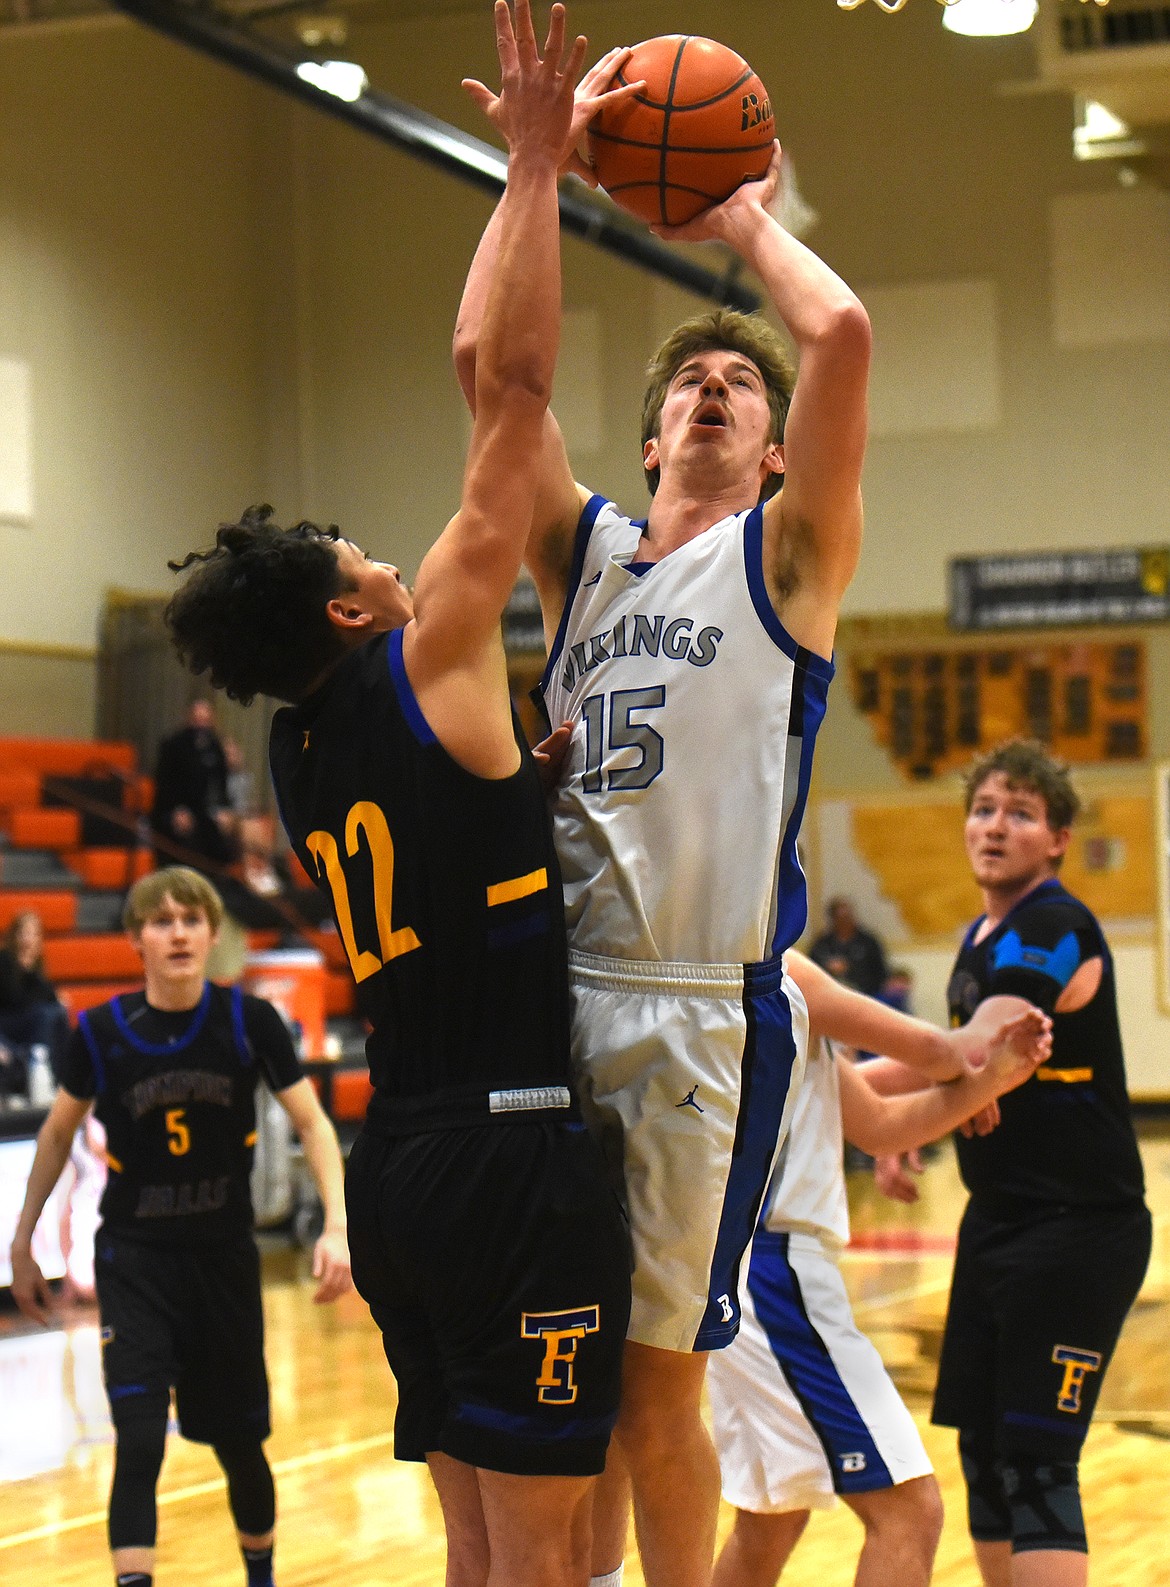 The Vikings battled it out on the court during the Western B Divisional Basketball Tournament in Eureka last weekend.
Jeremy Weber/Bigfork Eagle